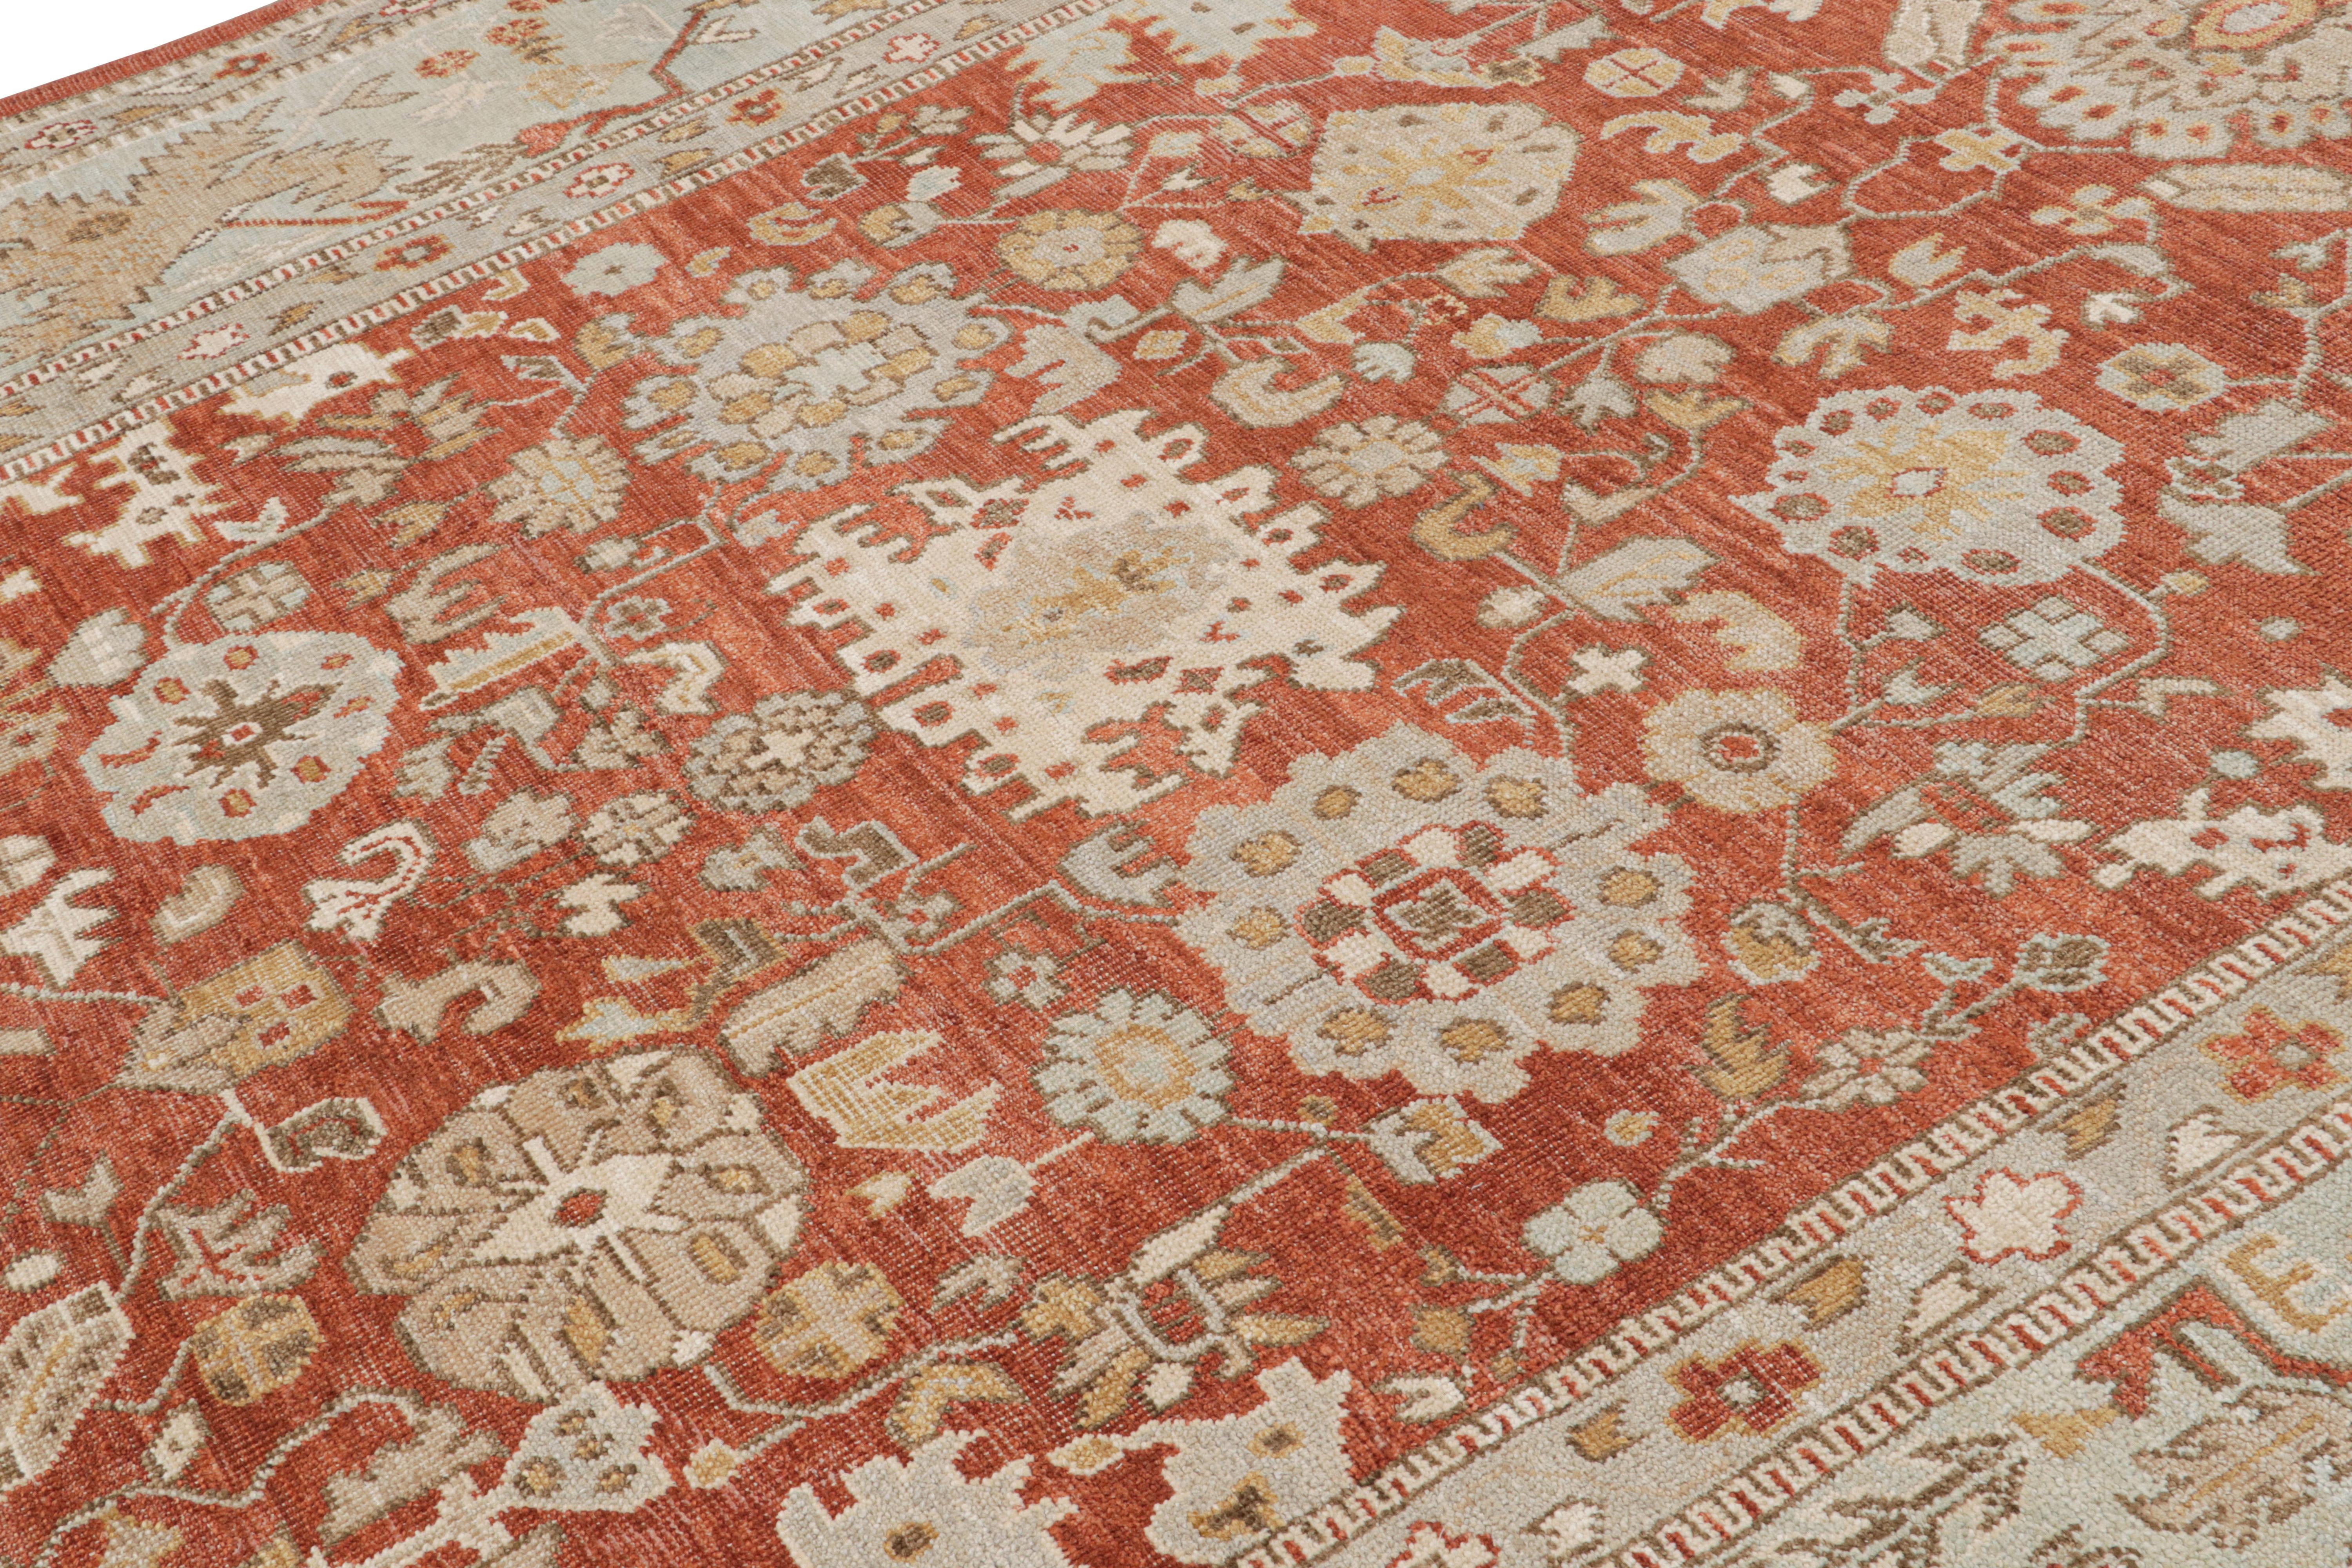 Hand-Knotted Rug & Kilim’s Oushak style rug in Red, Blue & Brown Floral Patterns For Sale